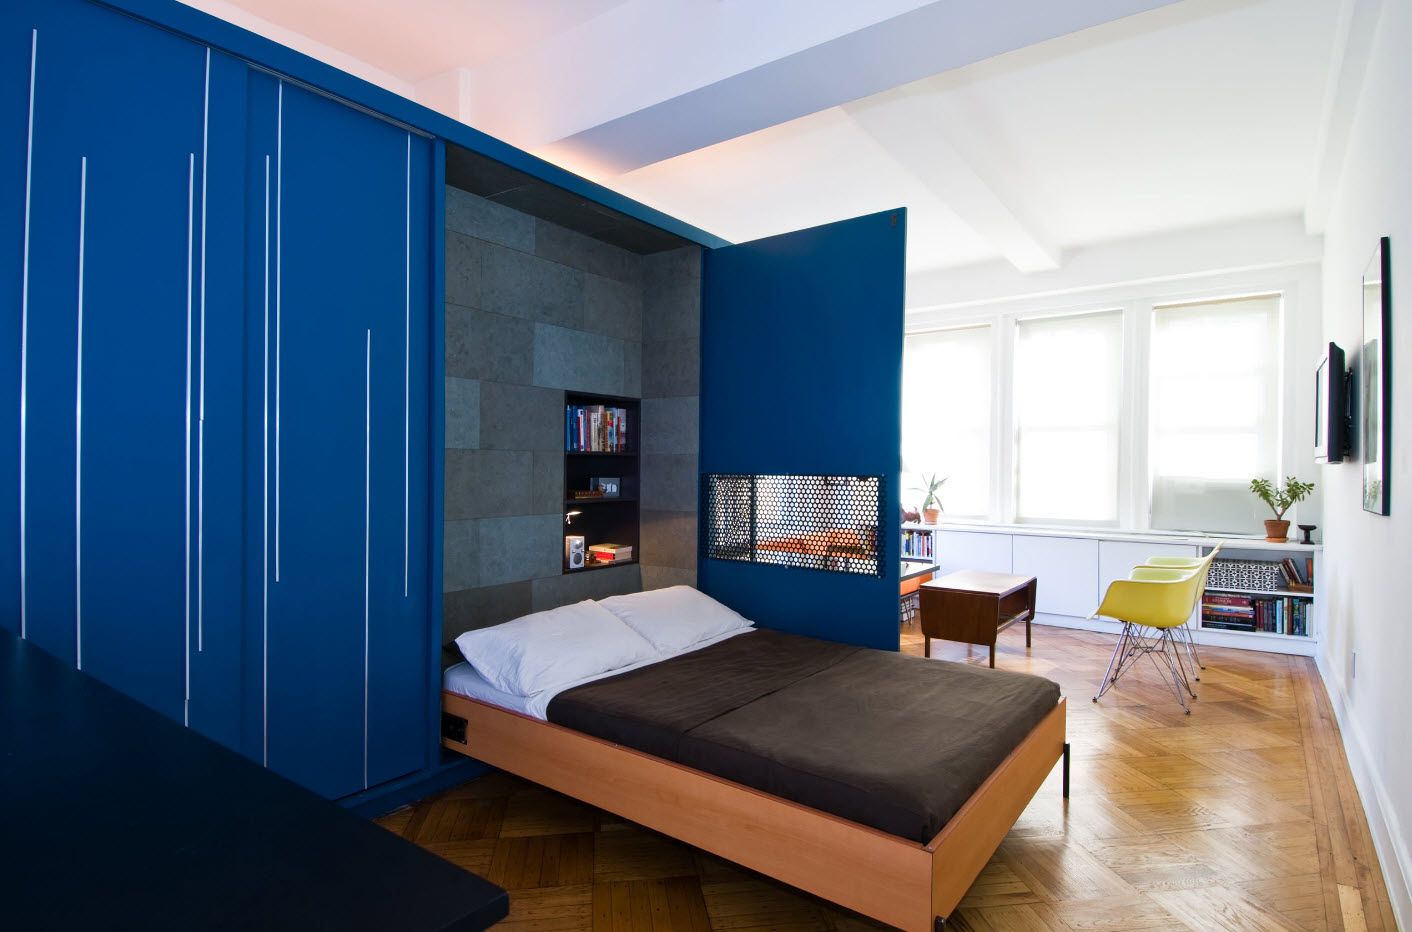 100+ Small Studio Apartment Design Ideas & Real-life Projects Photogallery. Blue partitions for zoning 